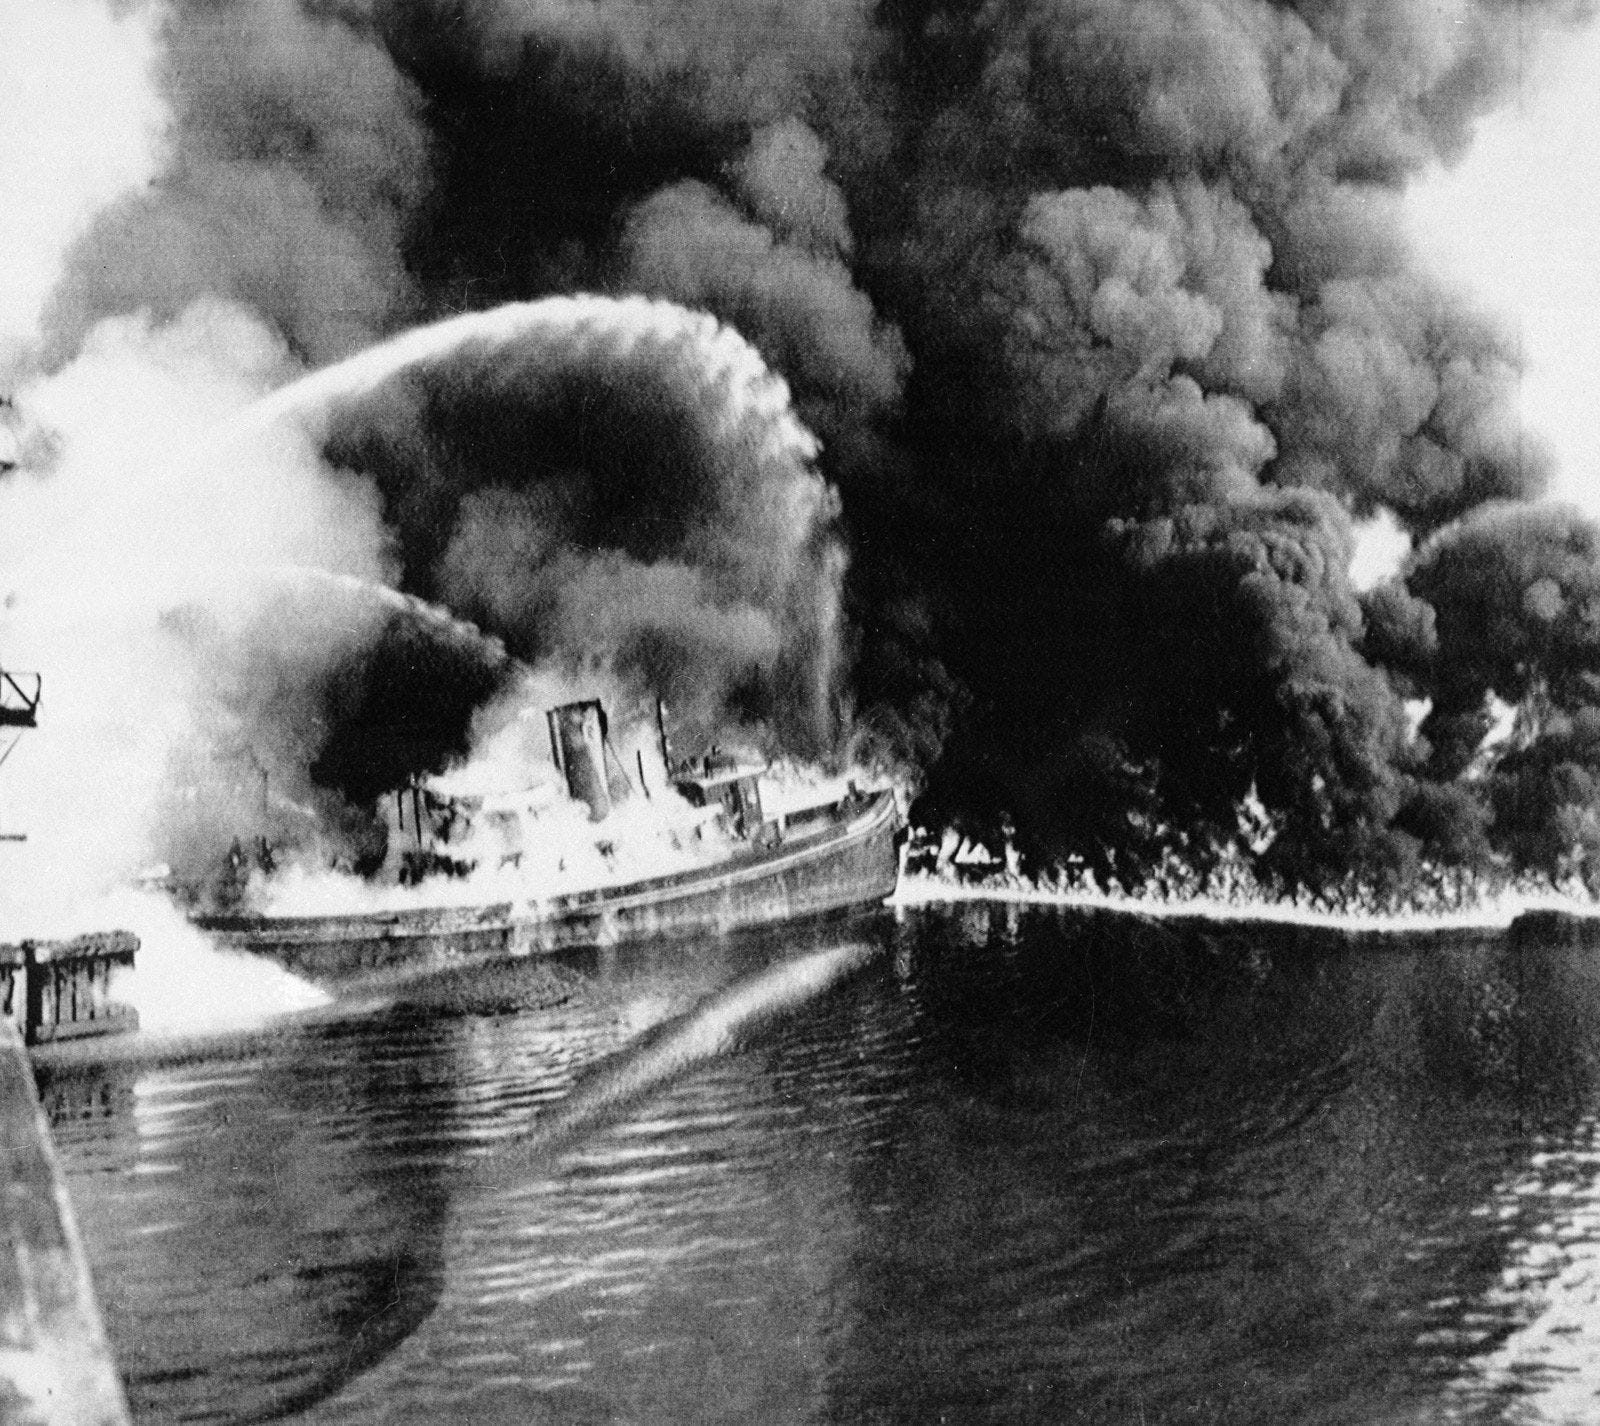 A fire tug fights flames on the Cuyahoga River near downtown Cleveland, Ohio, where oil and other industrial wastes caught fire on June 25, 1969. When Canada and the United States approved the first version of the Great Lakes Water Quality Agreement in 1972, the running joke in Cleveland was that anyone unlucky enough to fall into the Cuyahoga River would decay rather than drown.